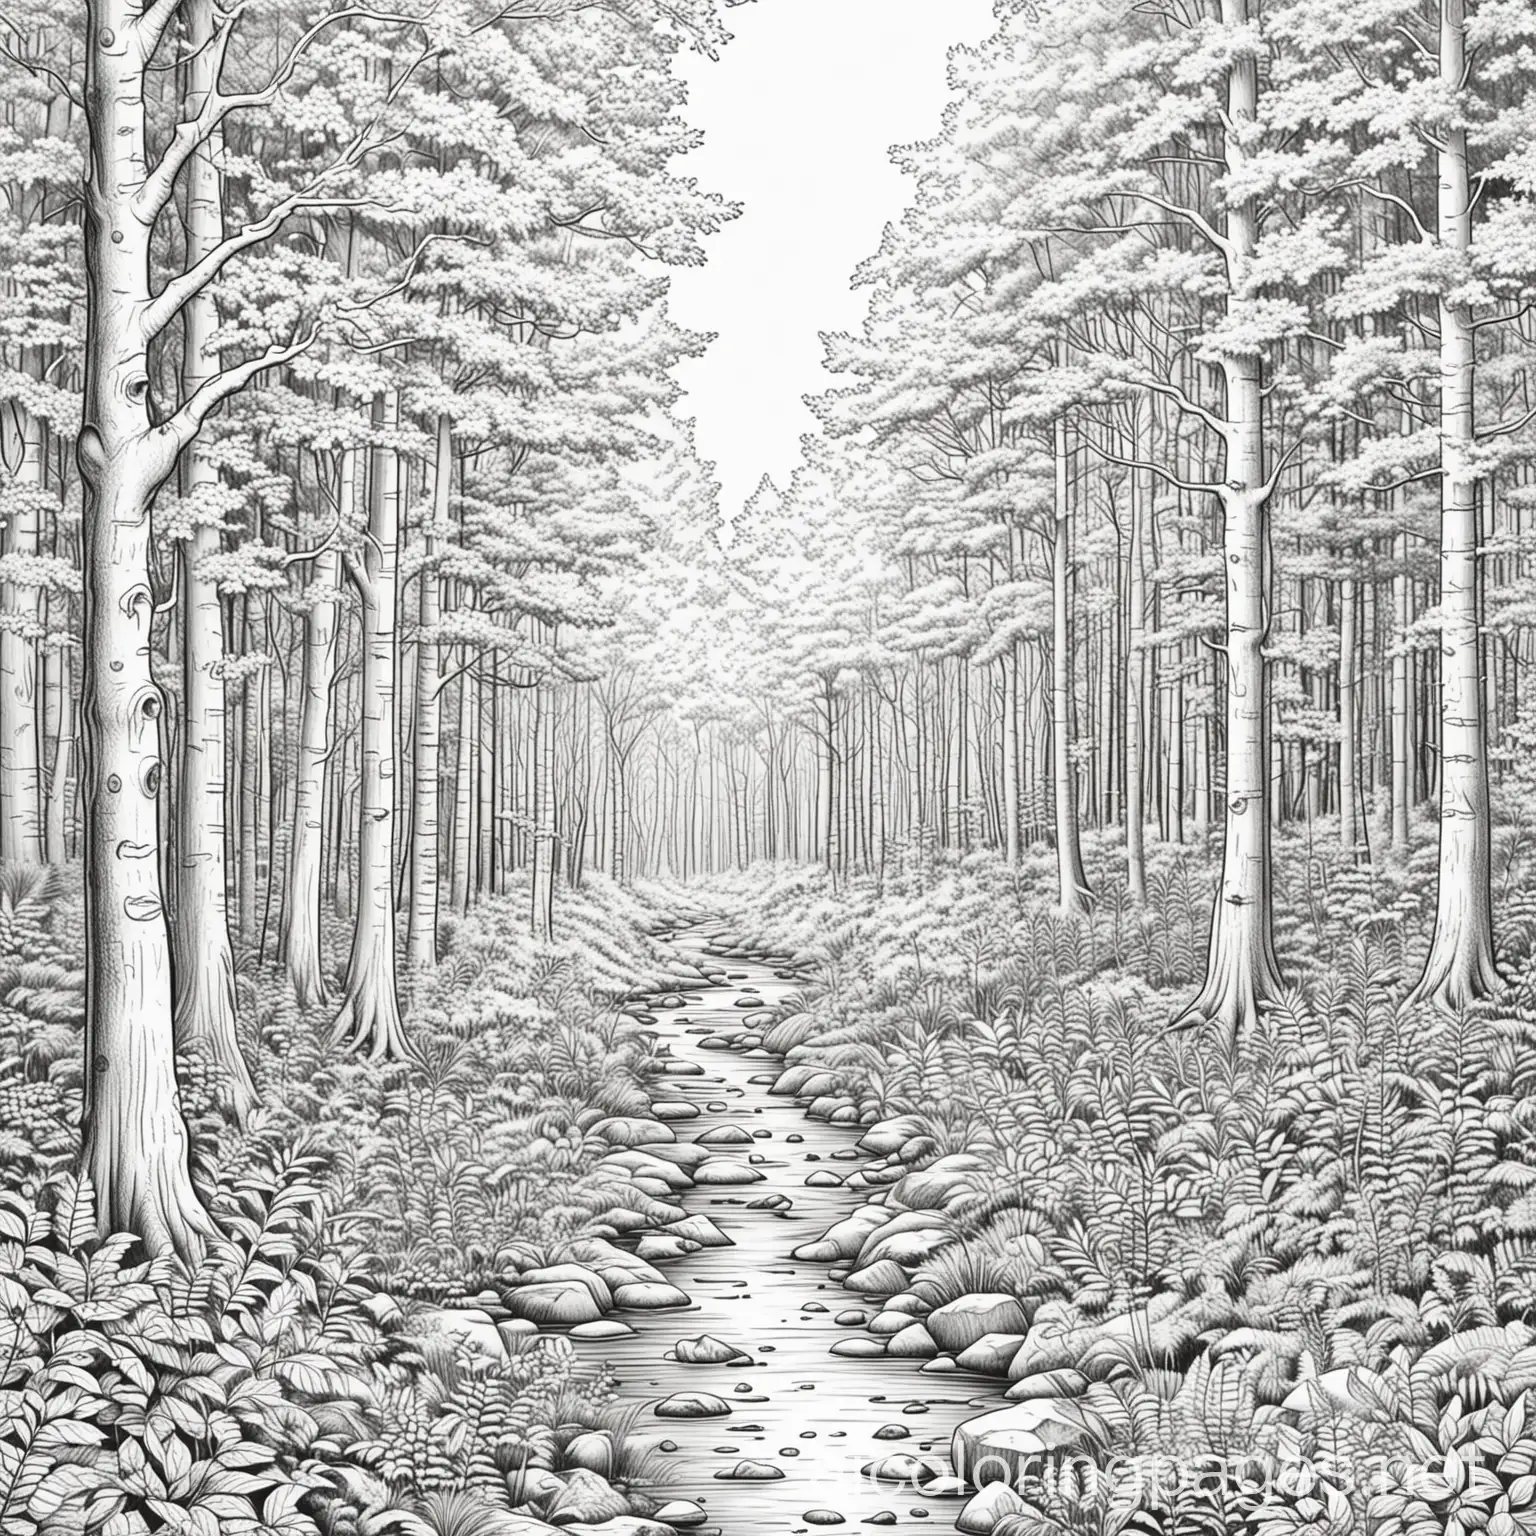 Forest scene, Coloring Page, black and white, line art, white background, Simplicity, Ample White Space. The background of the coloring page is plain white to make it easy for young children to color within the lines. The outlines of all the subjects are easy to distinguish, making it simple for kids to color without too much difficulty